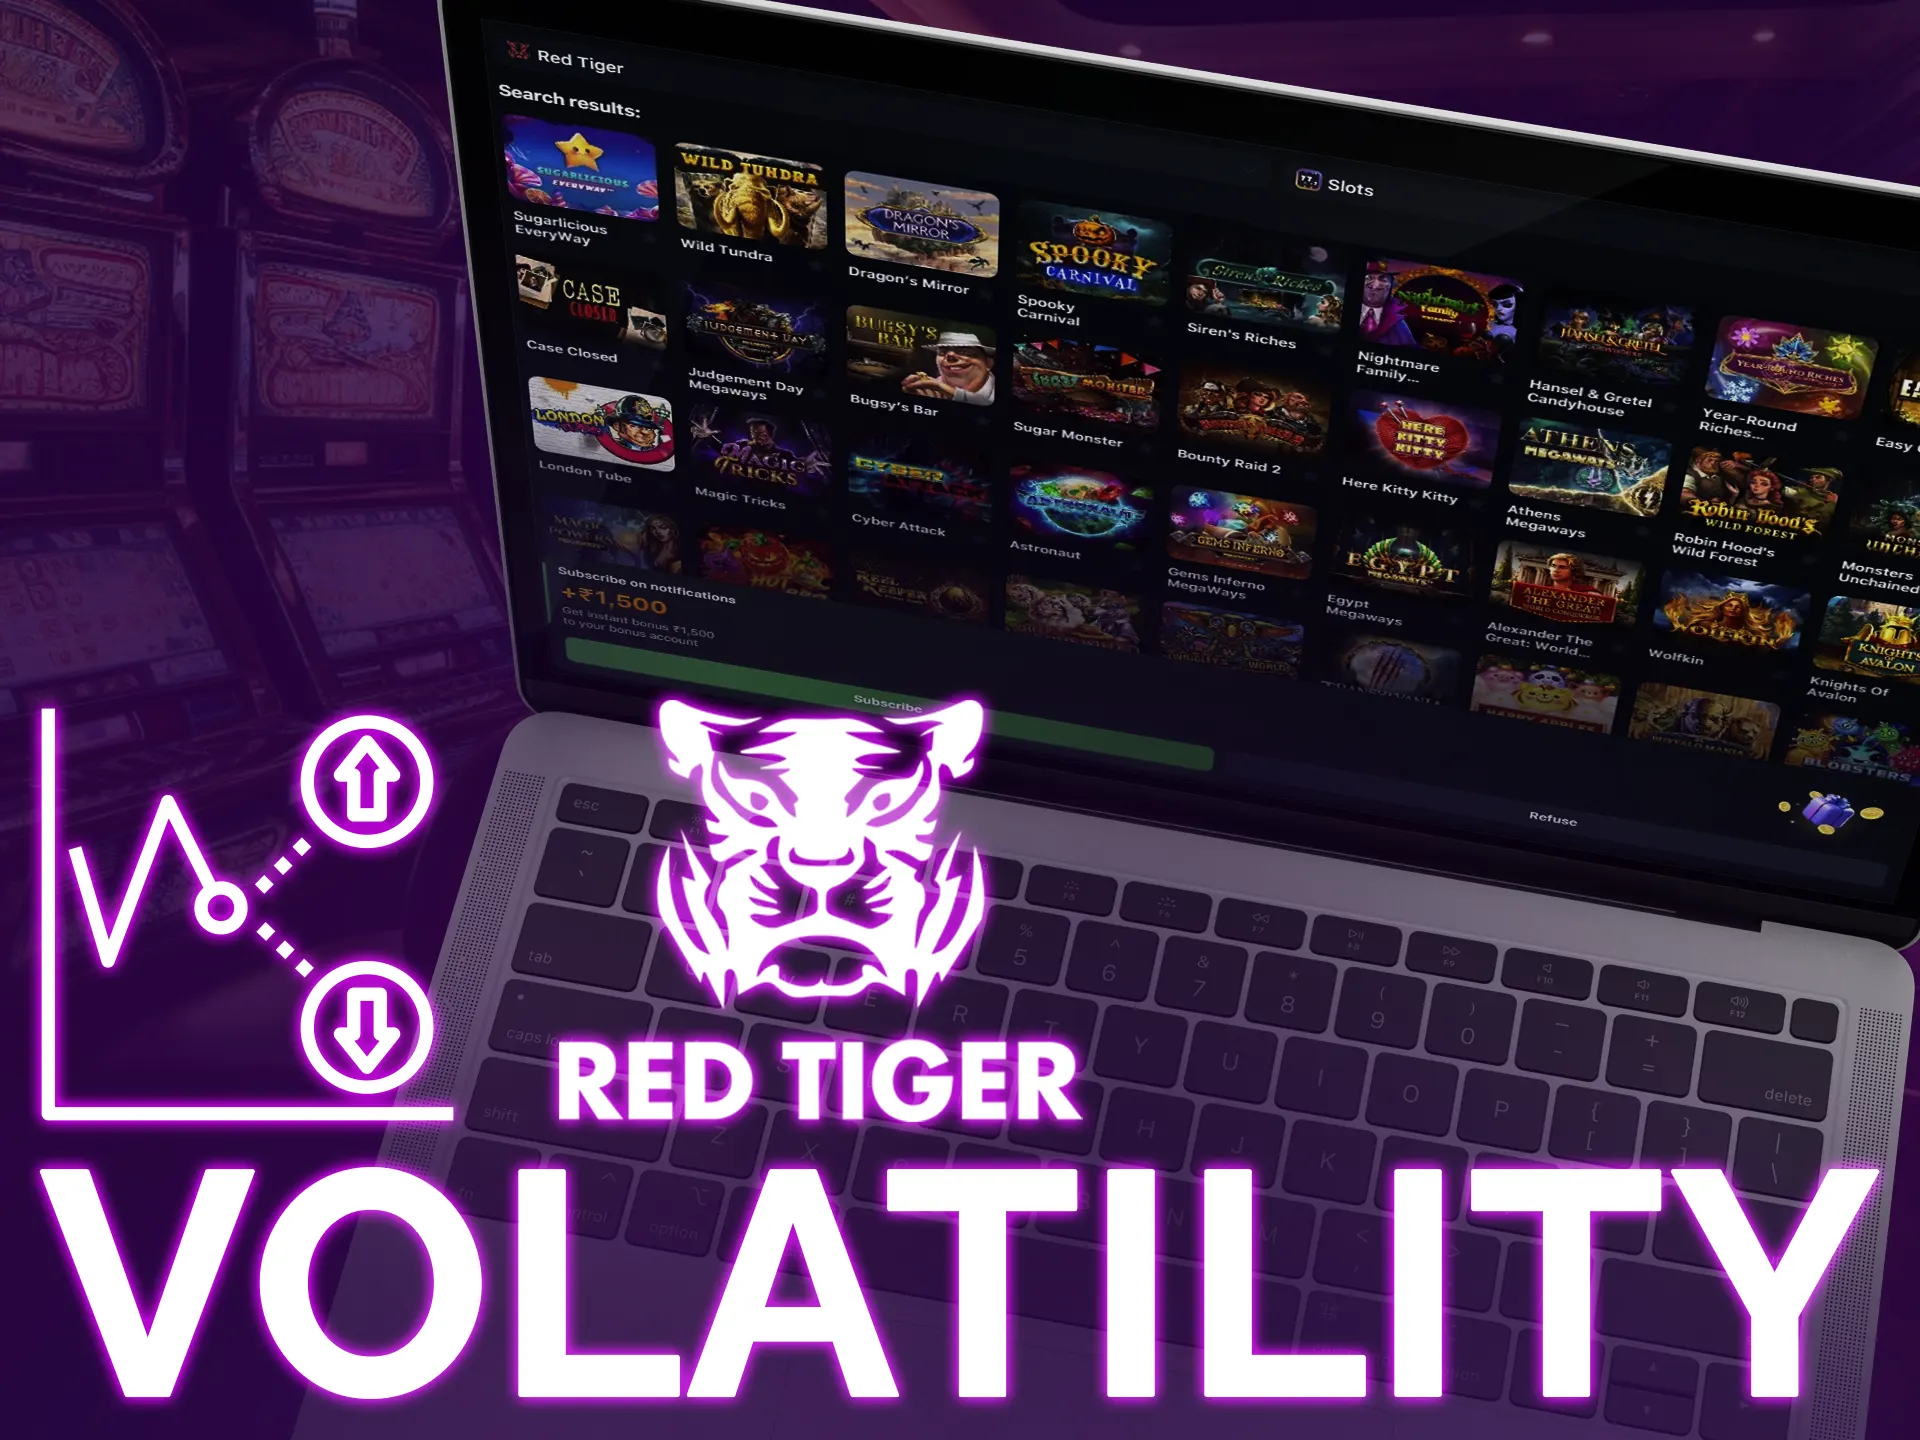 The Red Tiger's high-volatility machines include Mystic Wheel, Royal Gems, Cobra Queen, and War of Gods.